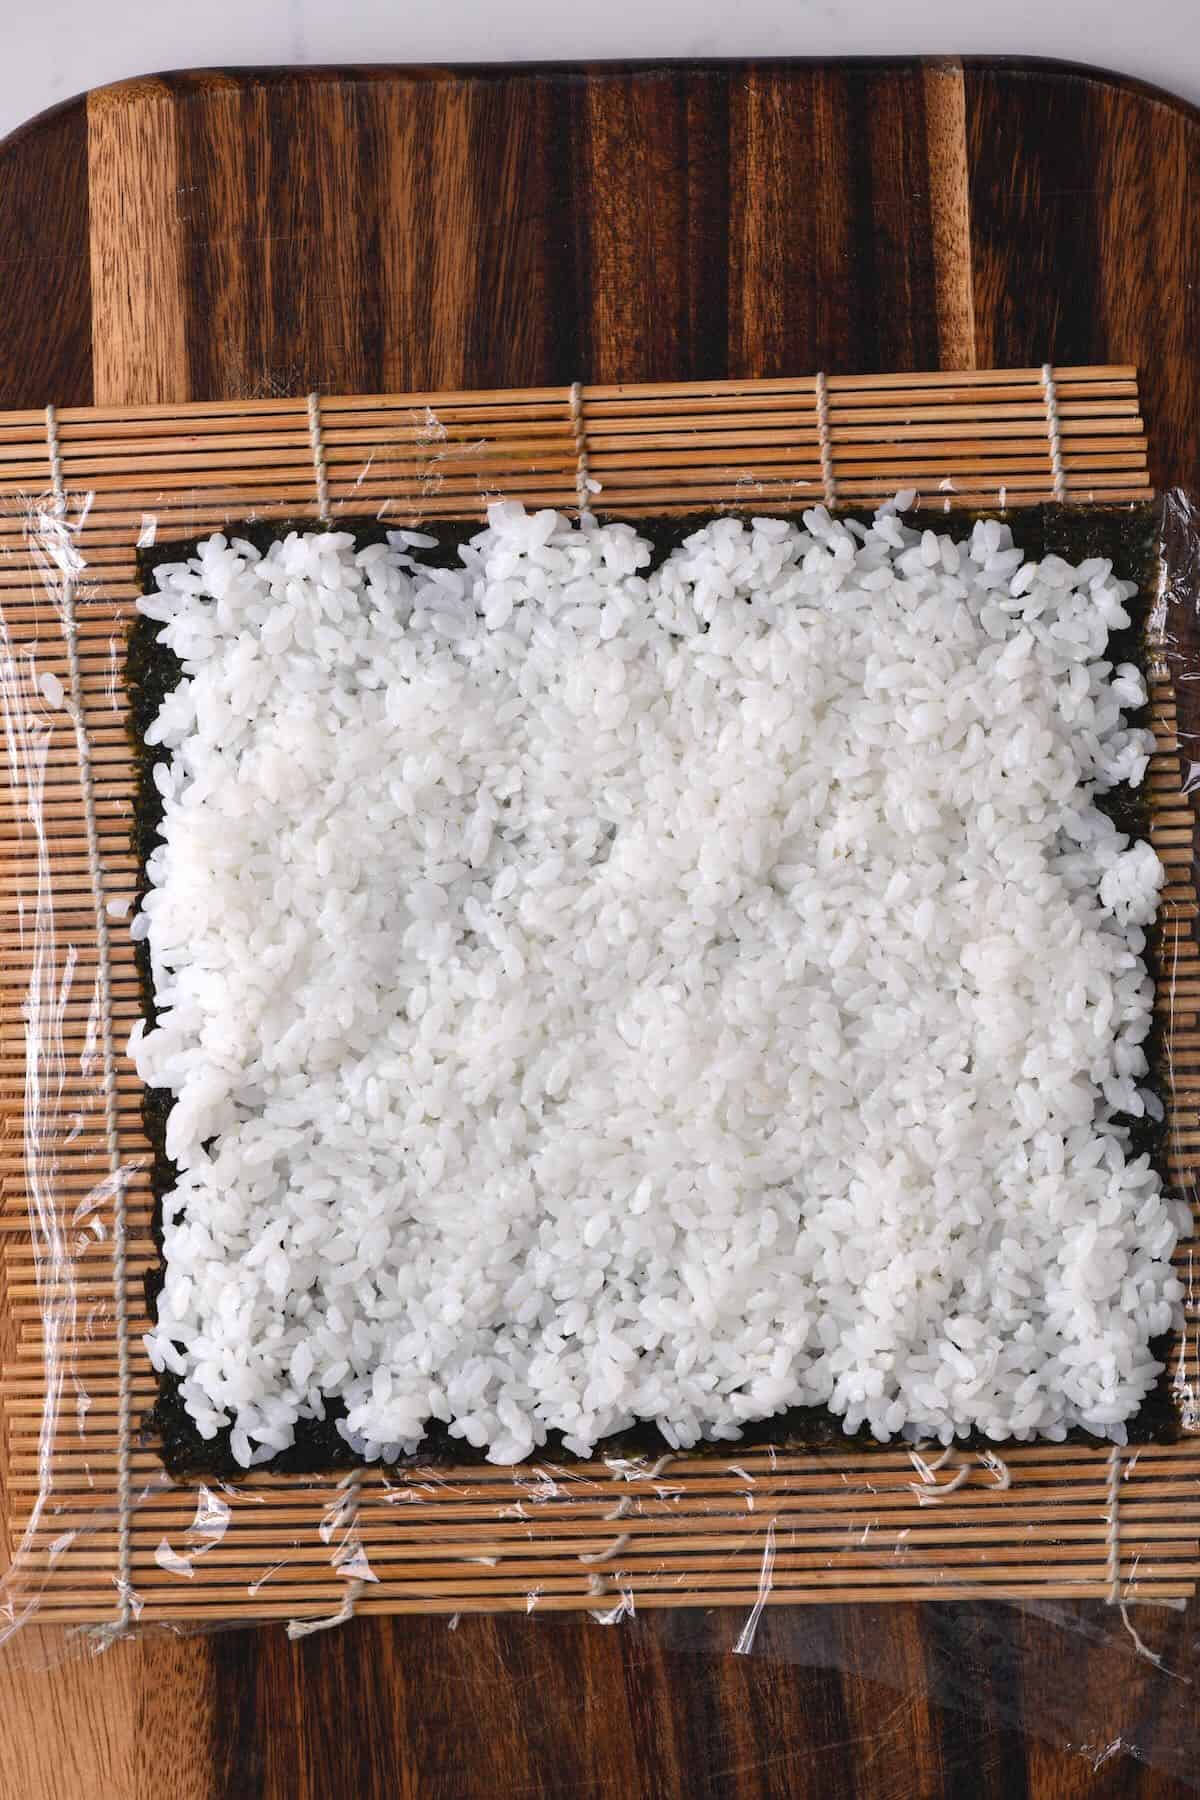 Using sushi rice to make a maki roll